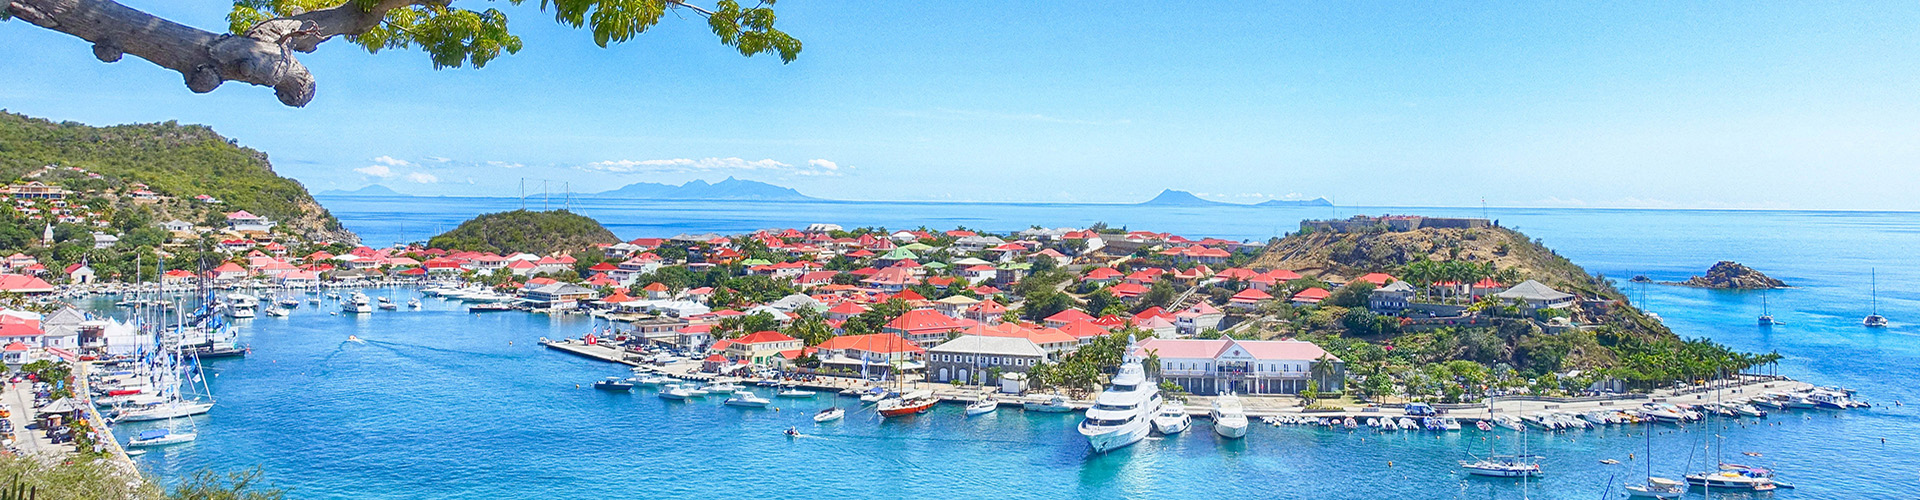 What To Do in Gustavia, St. Barts in 24 Hours - Windstar Cruises Travel Blog